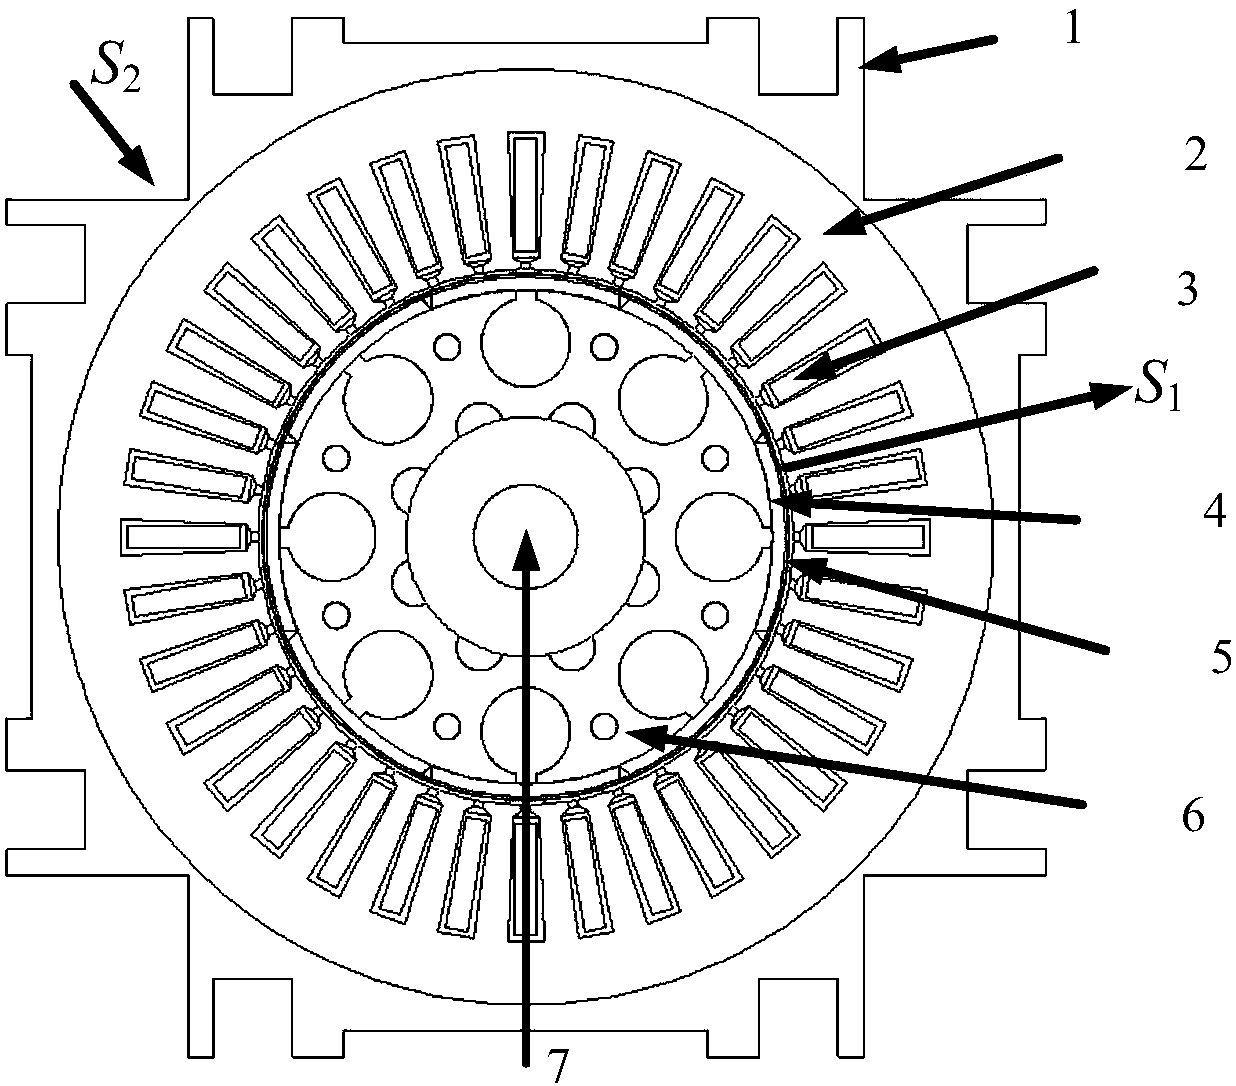 Method for calculating heat transfer ratio based on eddy current loss of rotor segmented sheath of permanent magnet motor